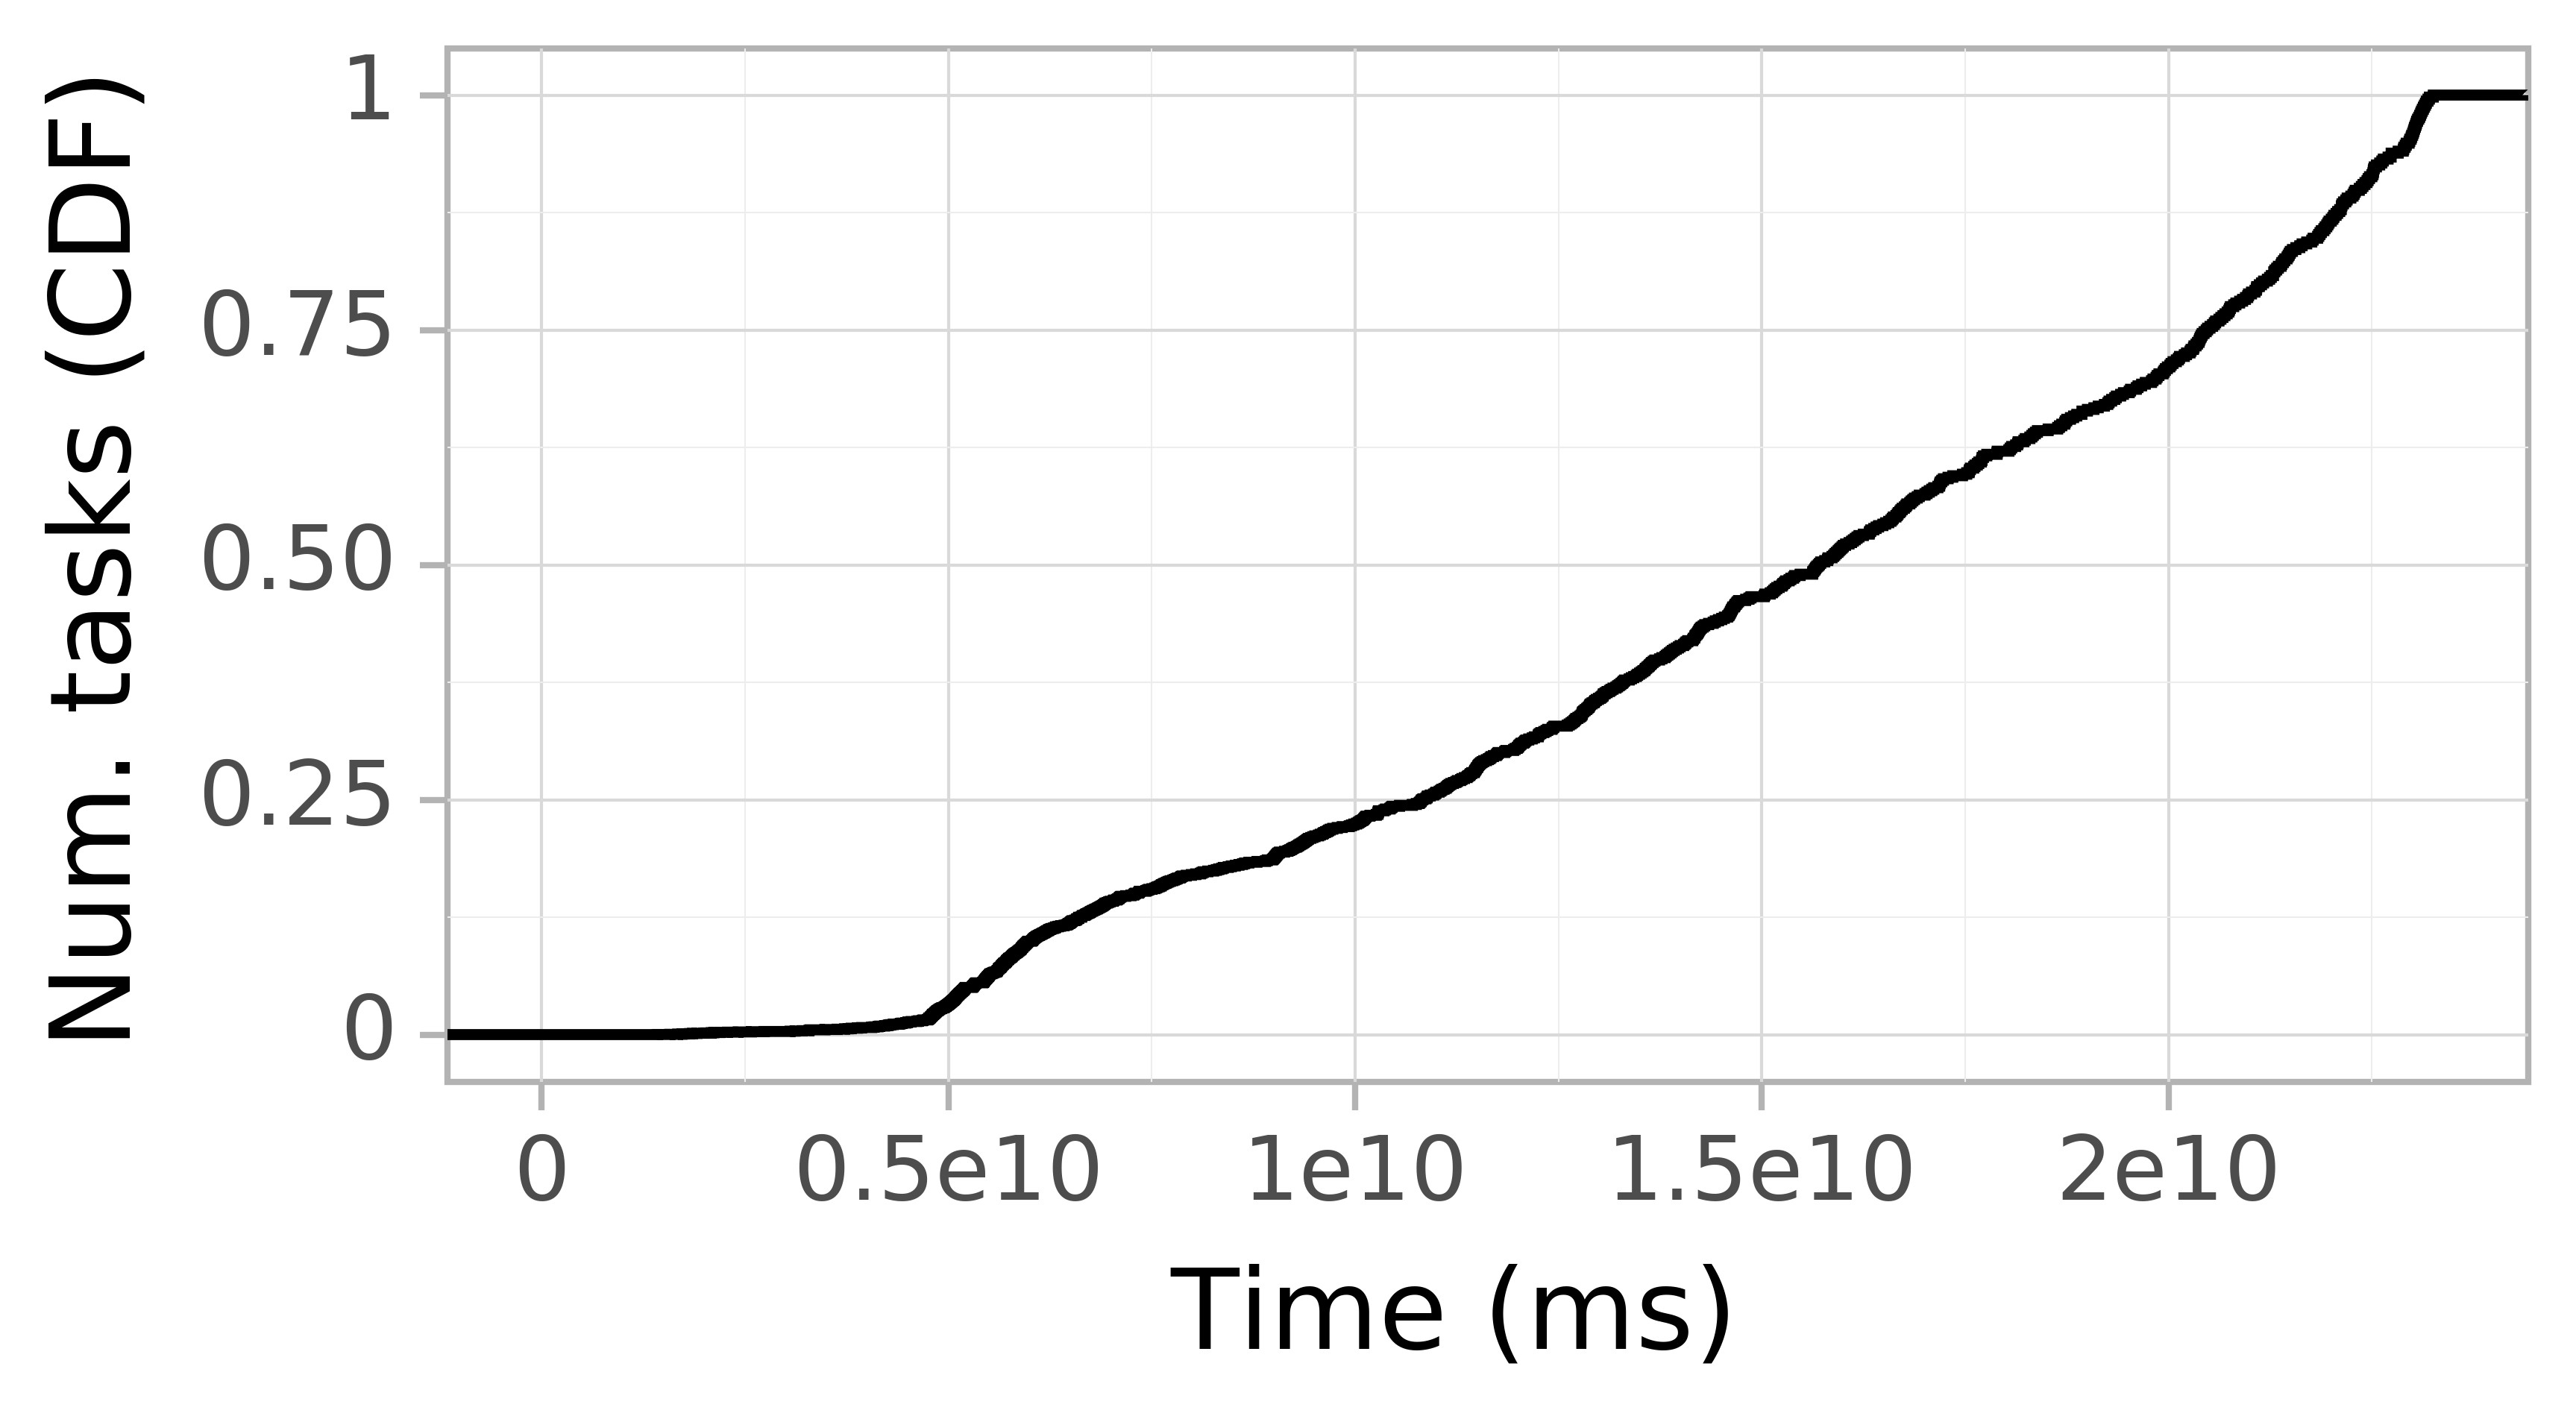 Task arrival CDF graph for the Two_Sigma_dft trace.